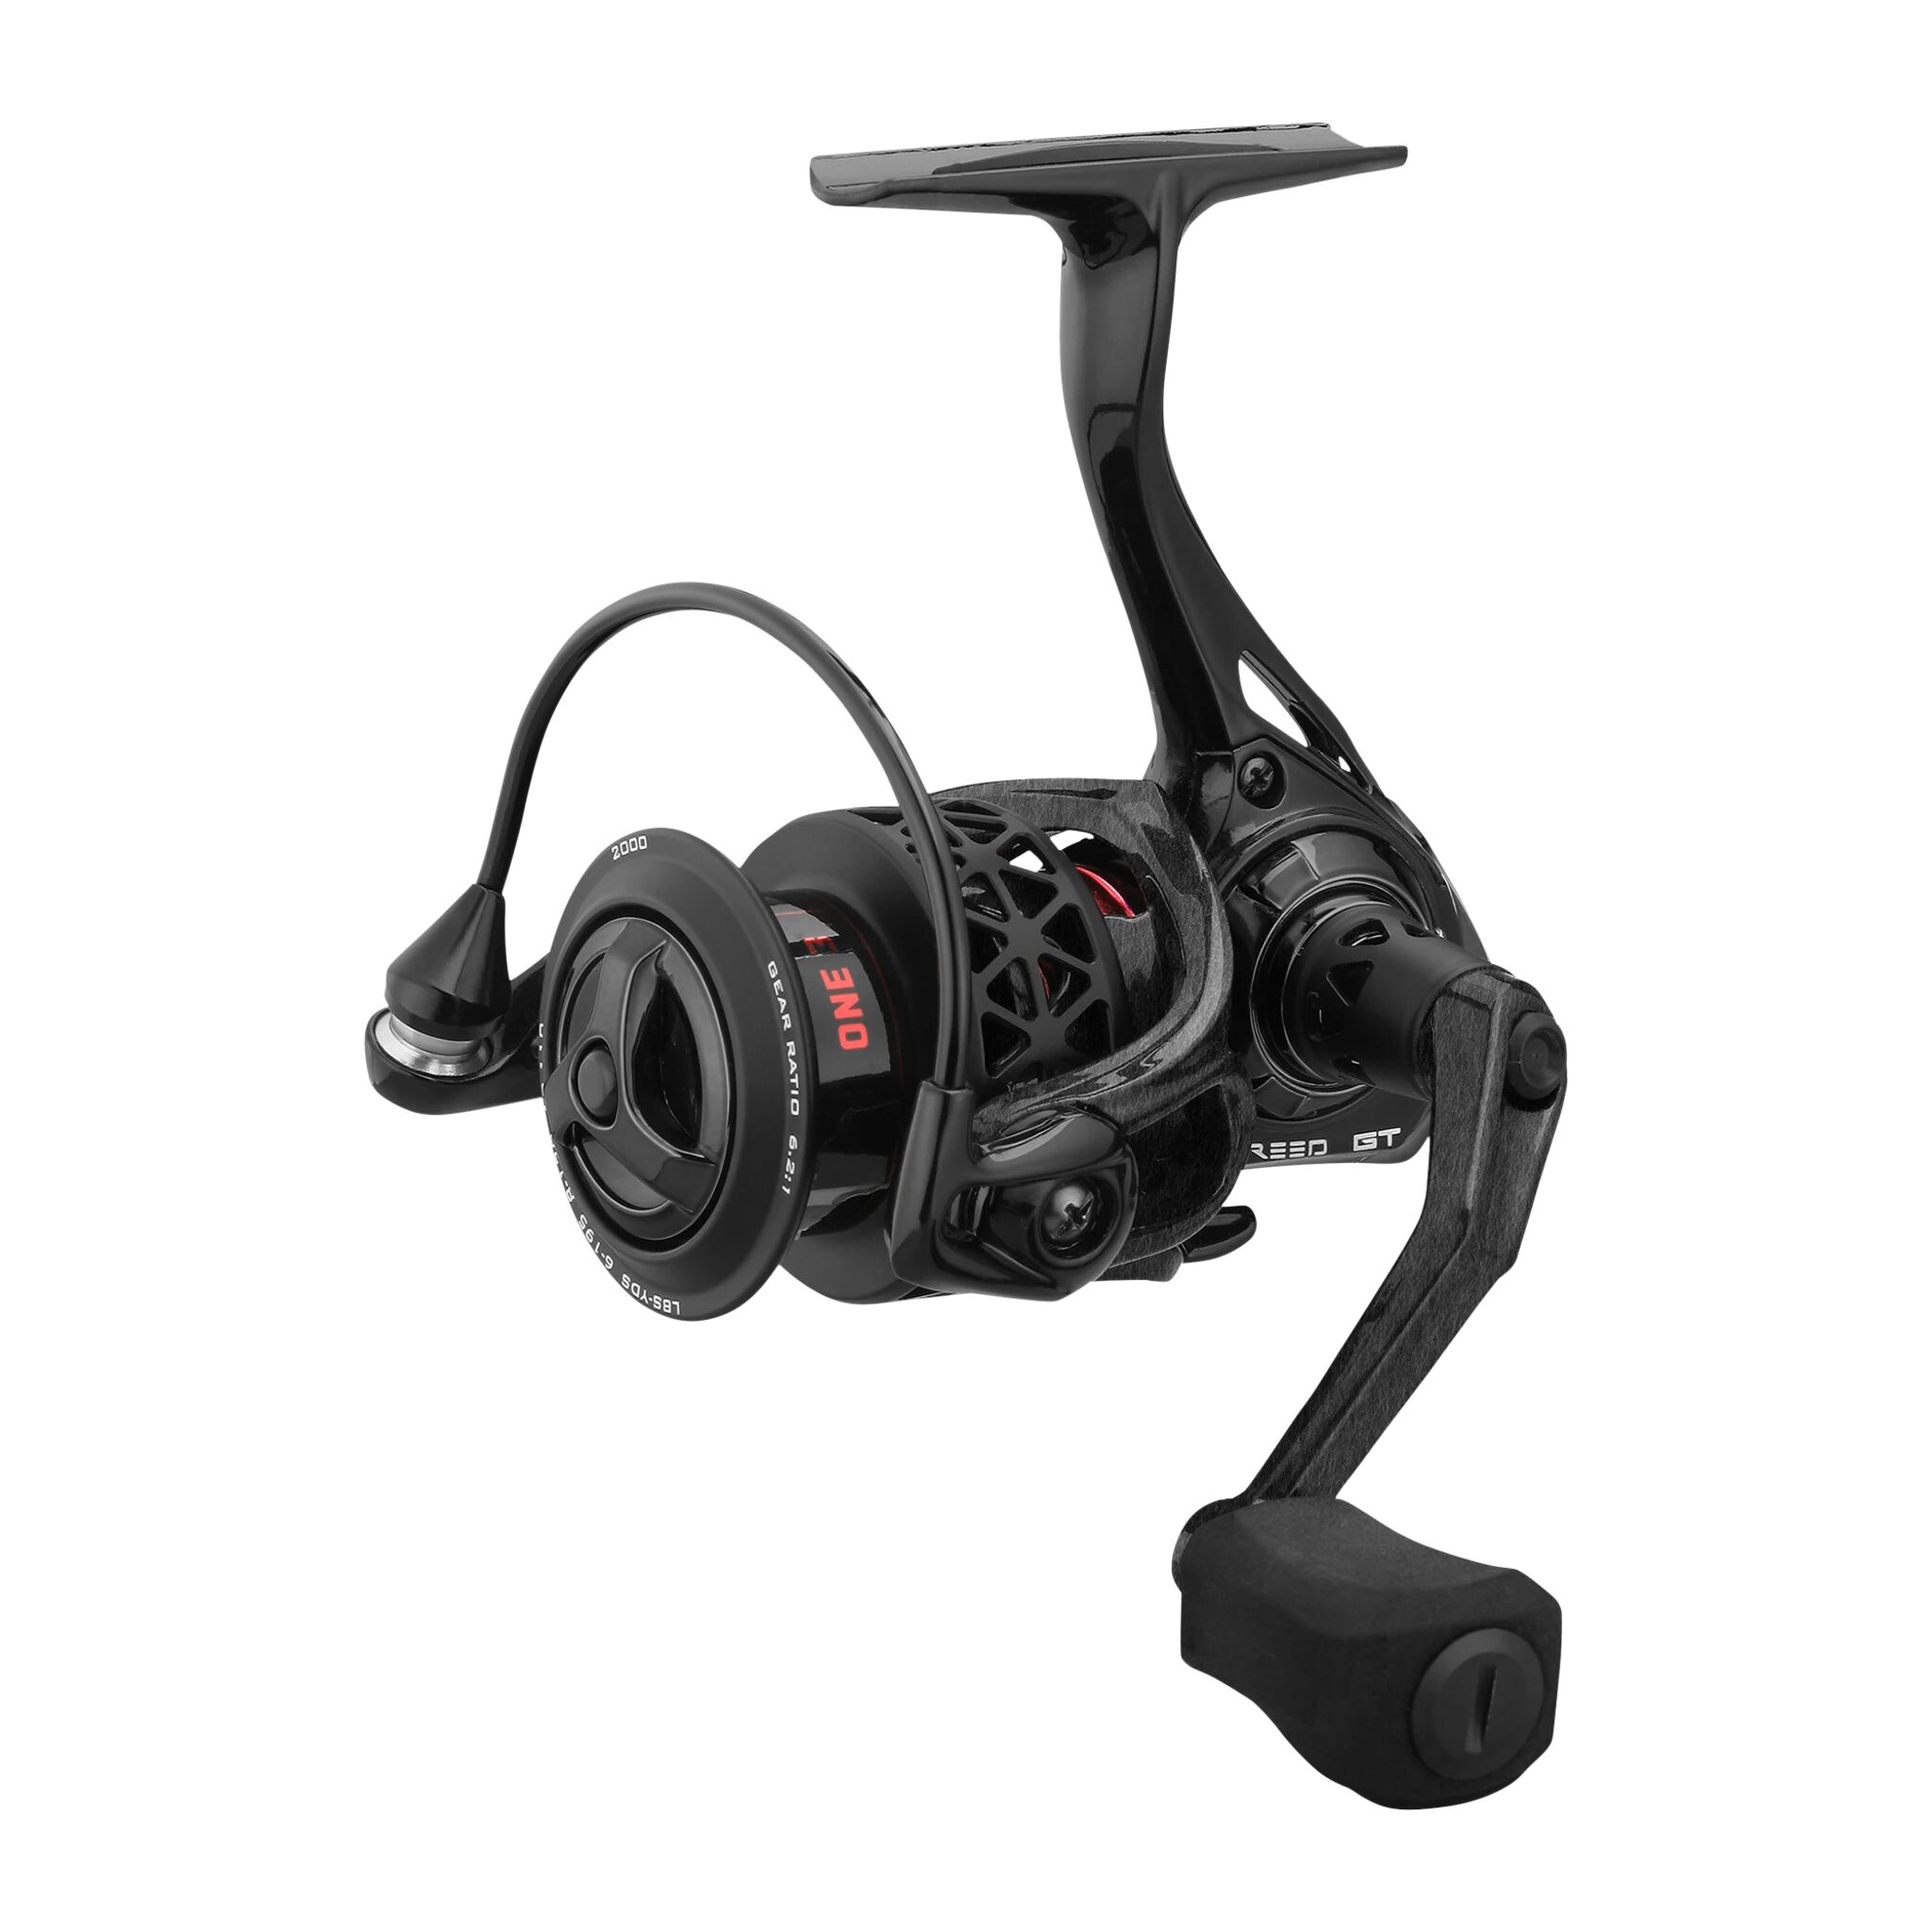 13 Fishing Creed Gt Spinning 6.2:1 1000, snelle  1000 STD